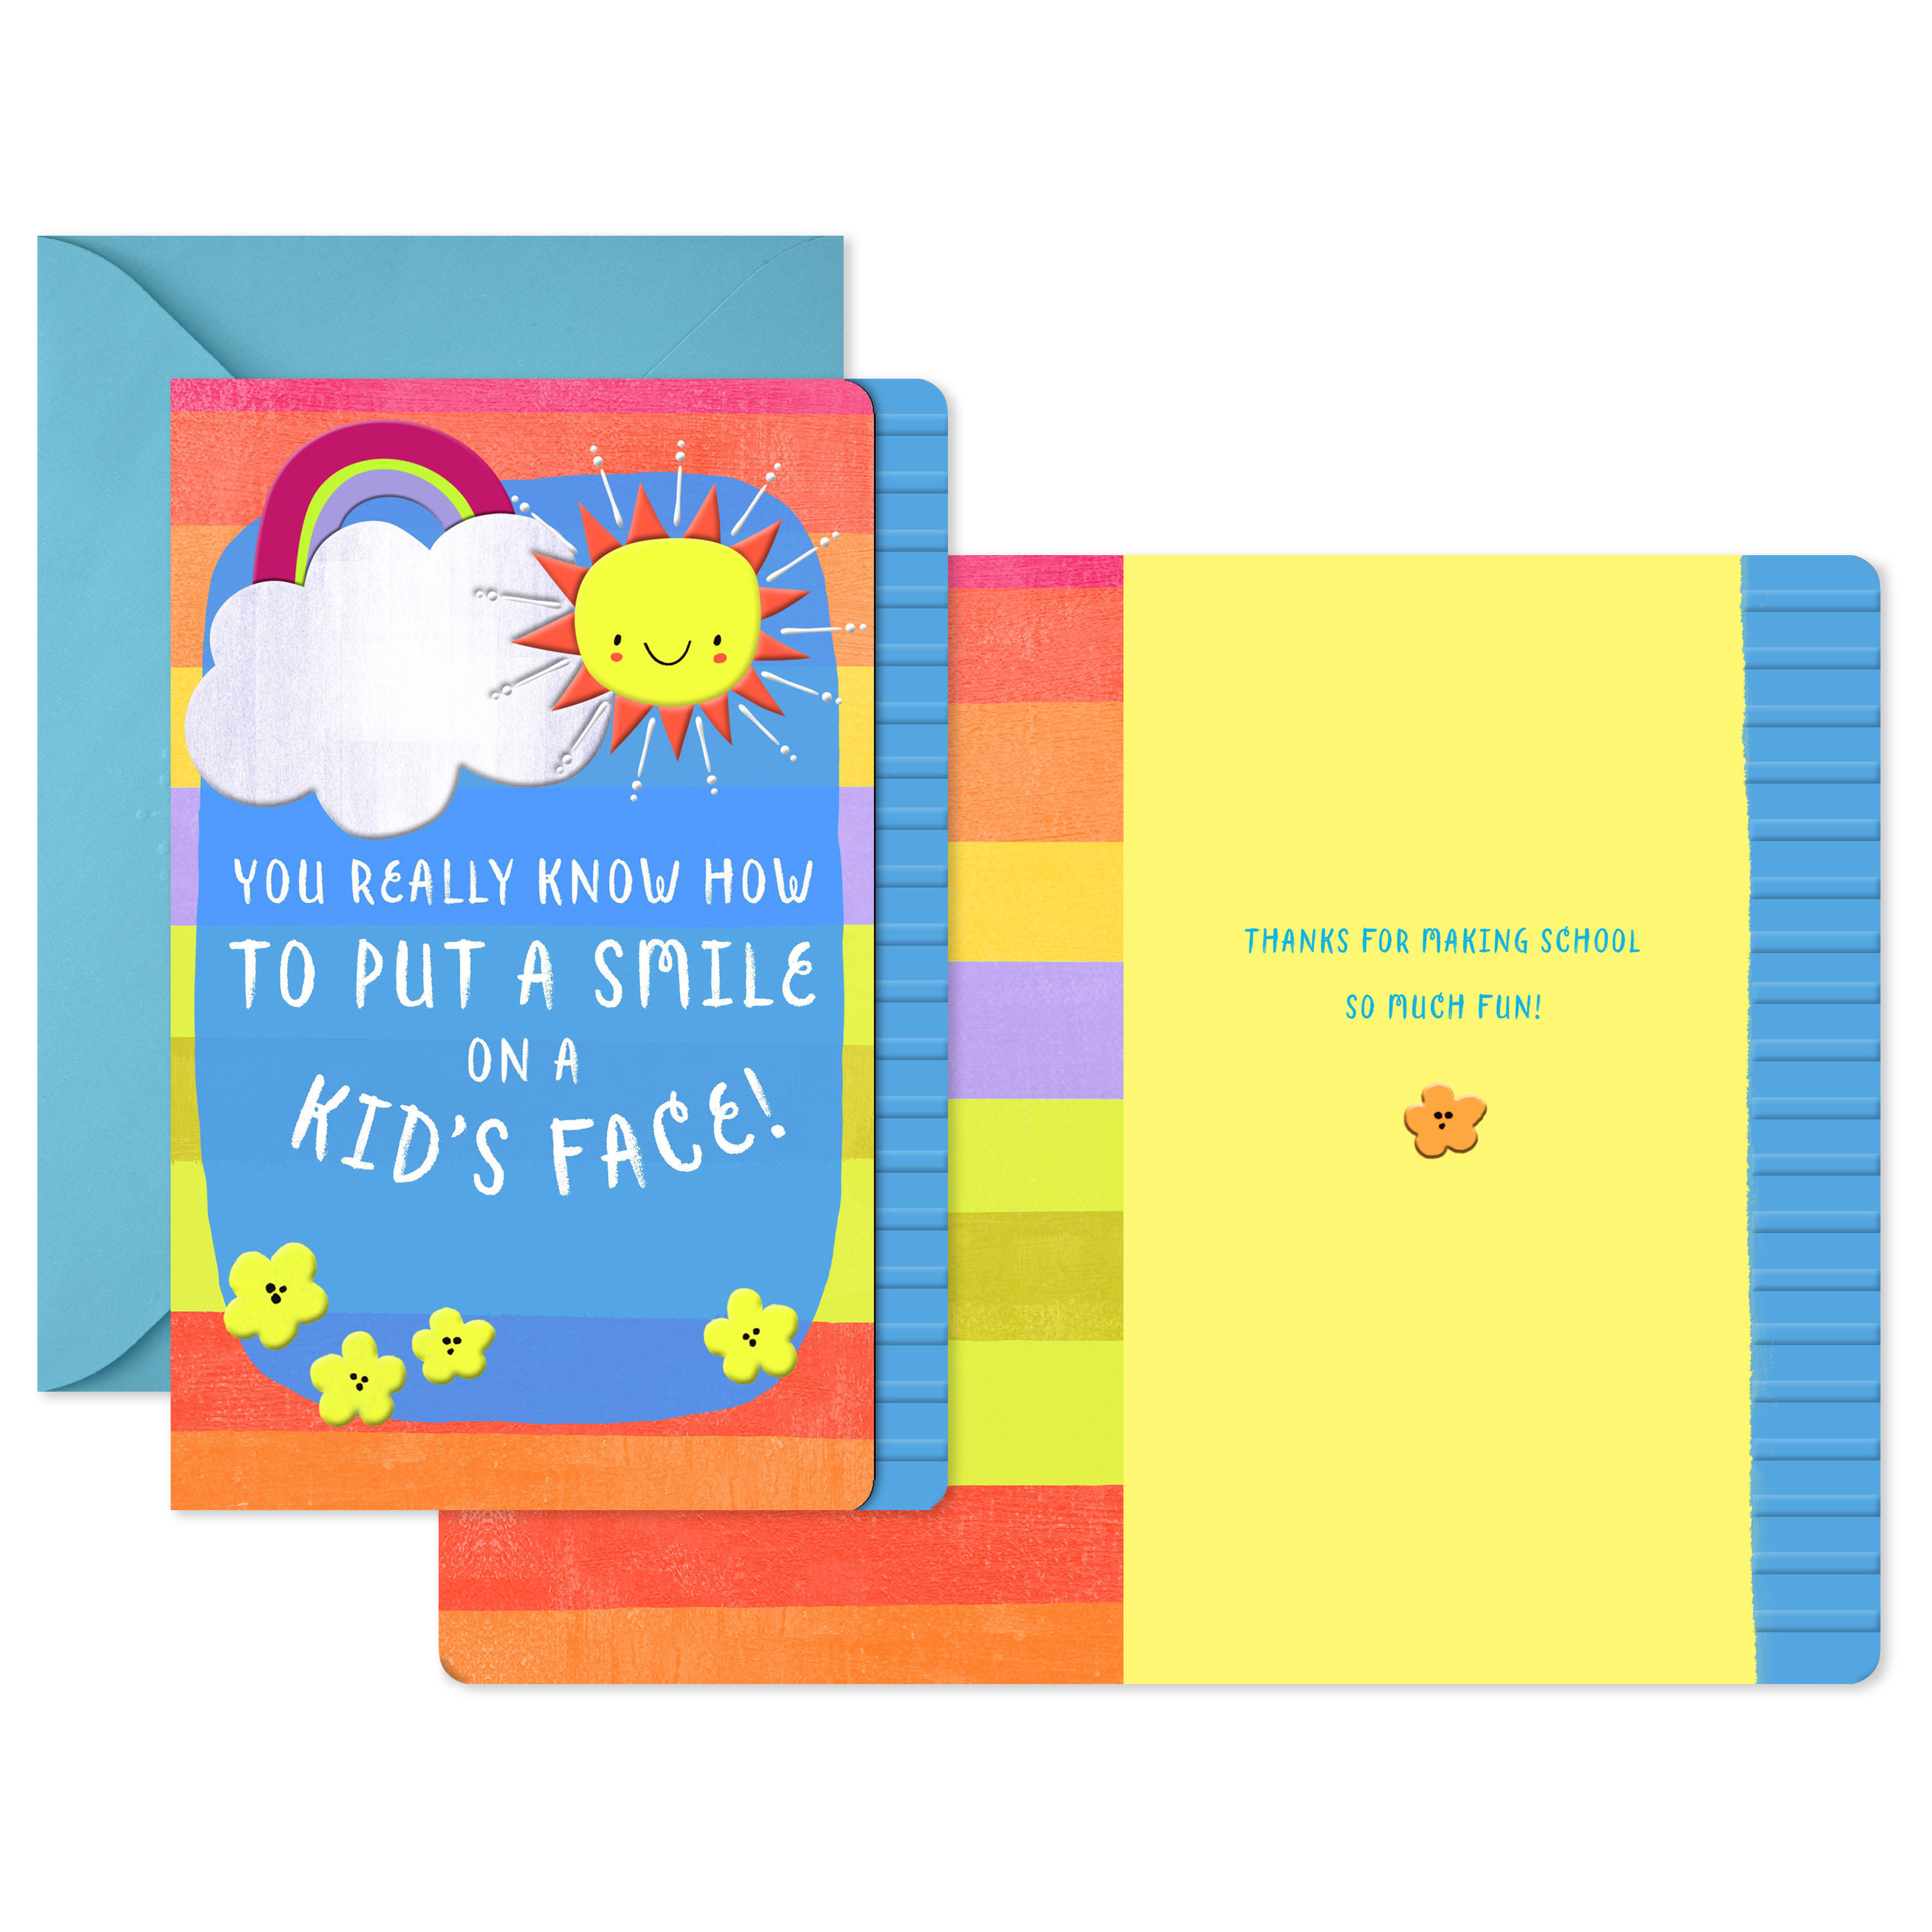 Hallmark Teacher Appreciation Cards Assortment for Preschool, Kindergarten, Elementary School, Graduation or Back to School (10 Cards and Gift Card Holders with Envelopes) - image 4 of 11